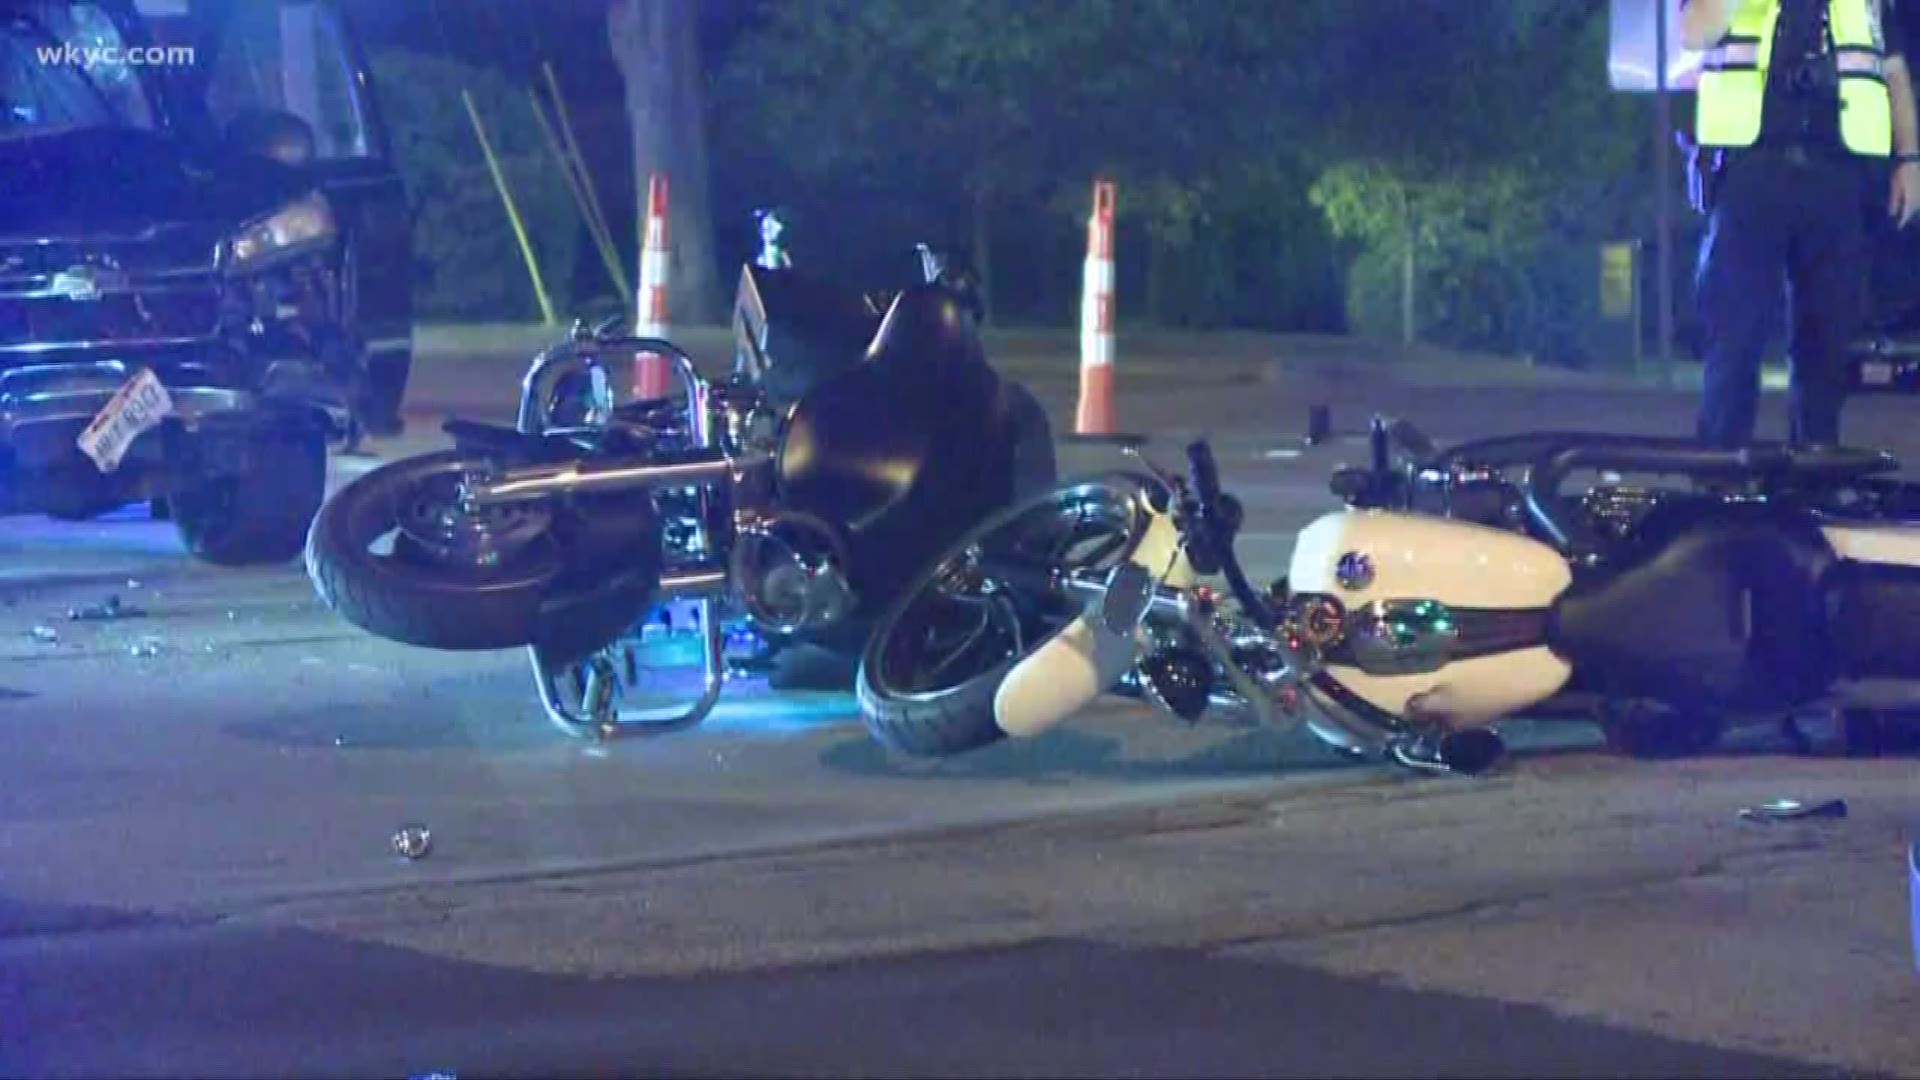 July 15, 2019: Four people were taken to the hospital after their motorcycles were hit from behind overnight. It happened in North Olmsted at Lorain Road and Dover Center Road when authorities say a pickup truck collided with three motorcycles at a red light. The condition of those hurt is unknown at this time. Authorities say the incident remains under investigation.